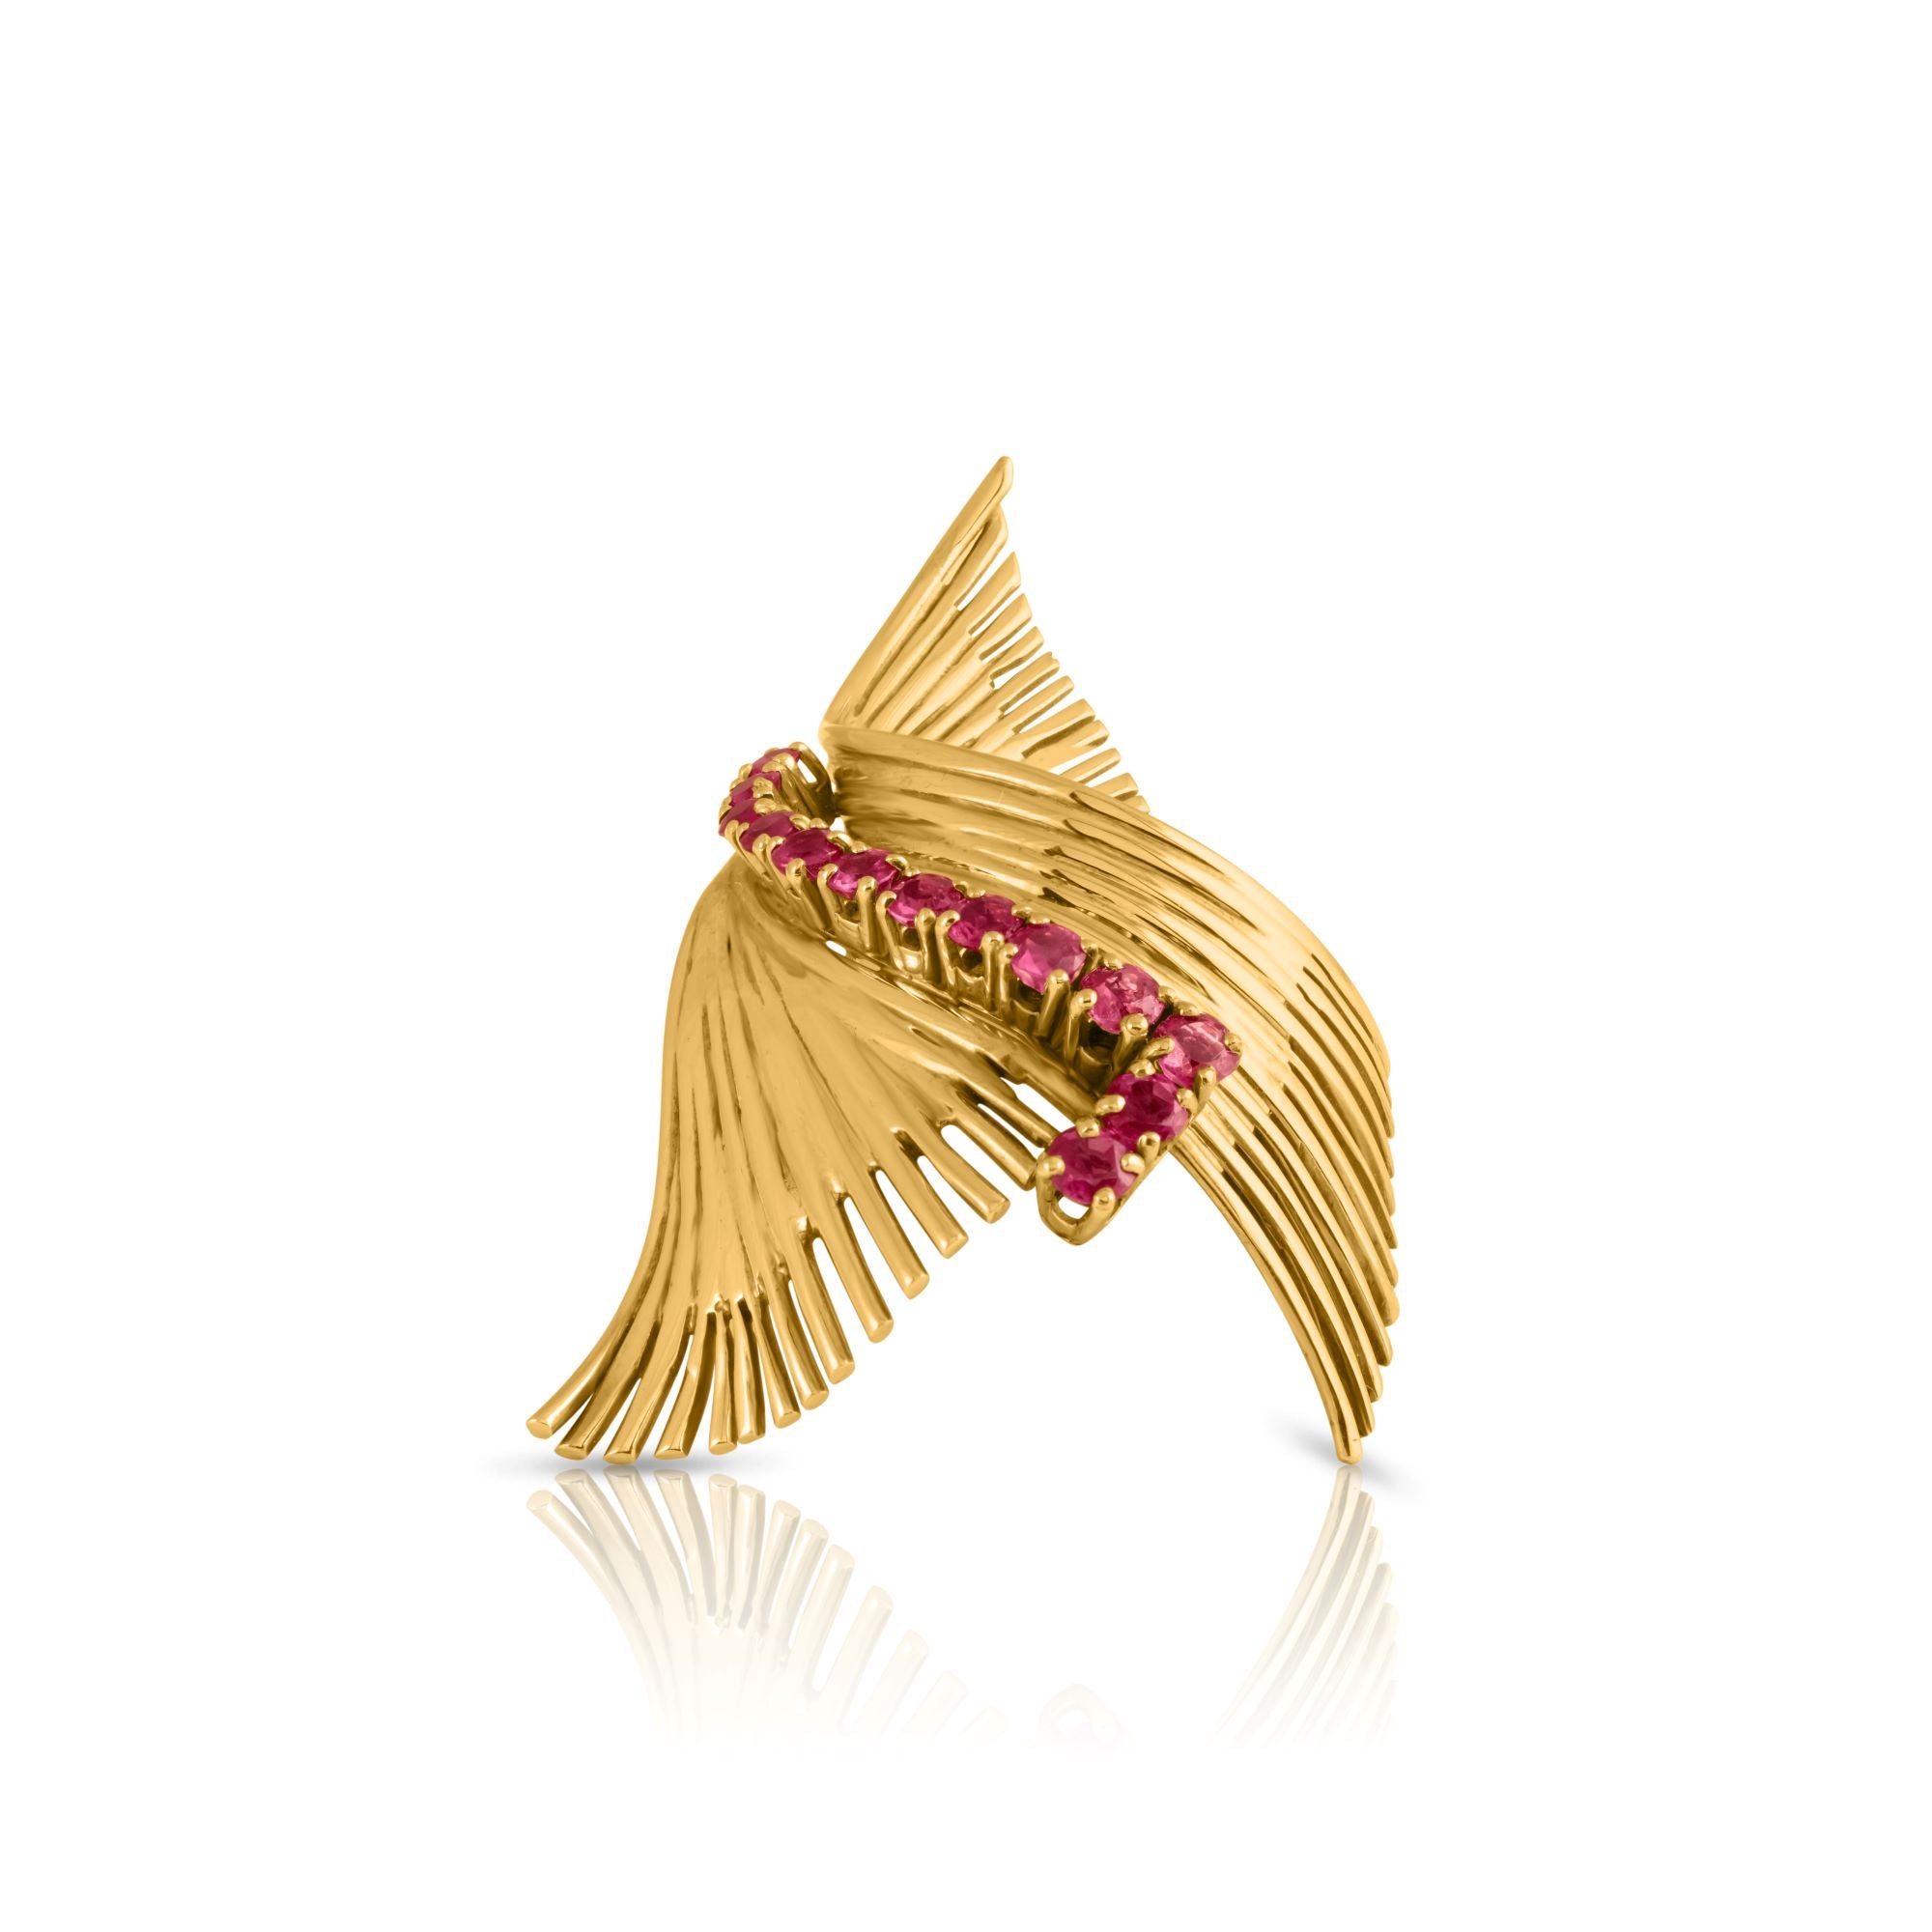 Vintage Gold and Ruby Brooch